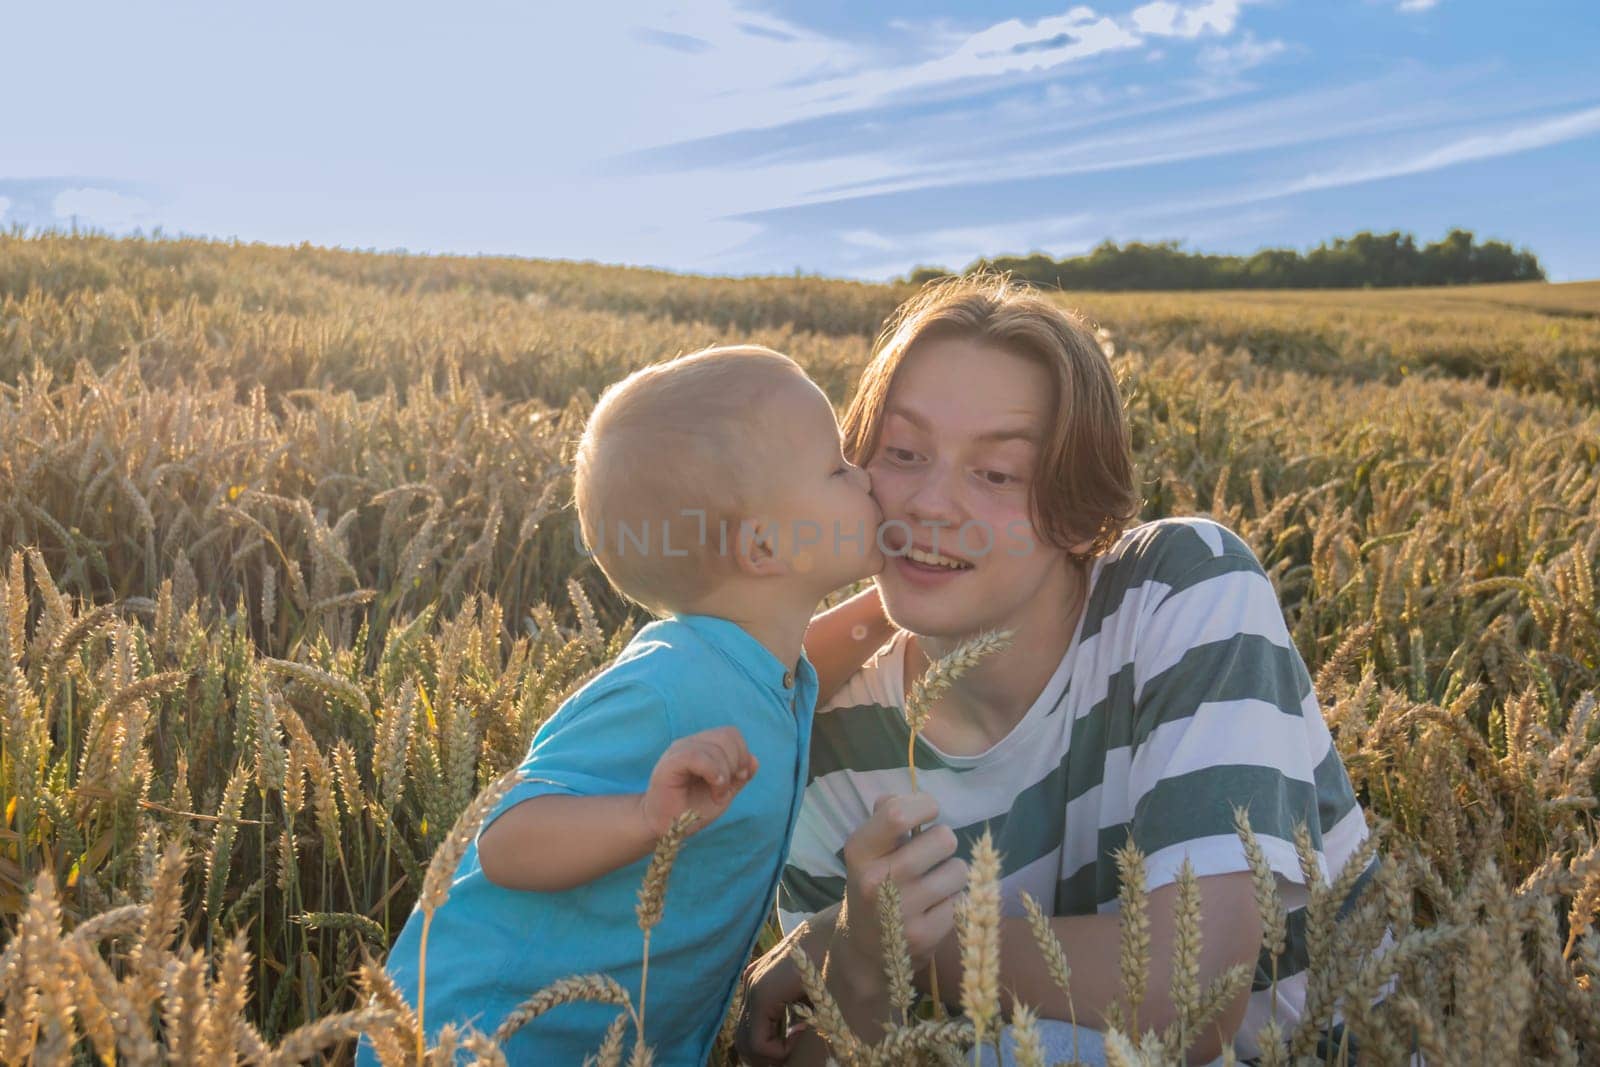 A little boy and his teenage brother are having fun walking in a field with ripe wheat. Grain for making bread. the concept of economic crisis and hunger